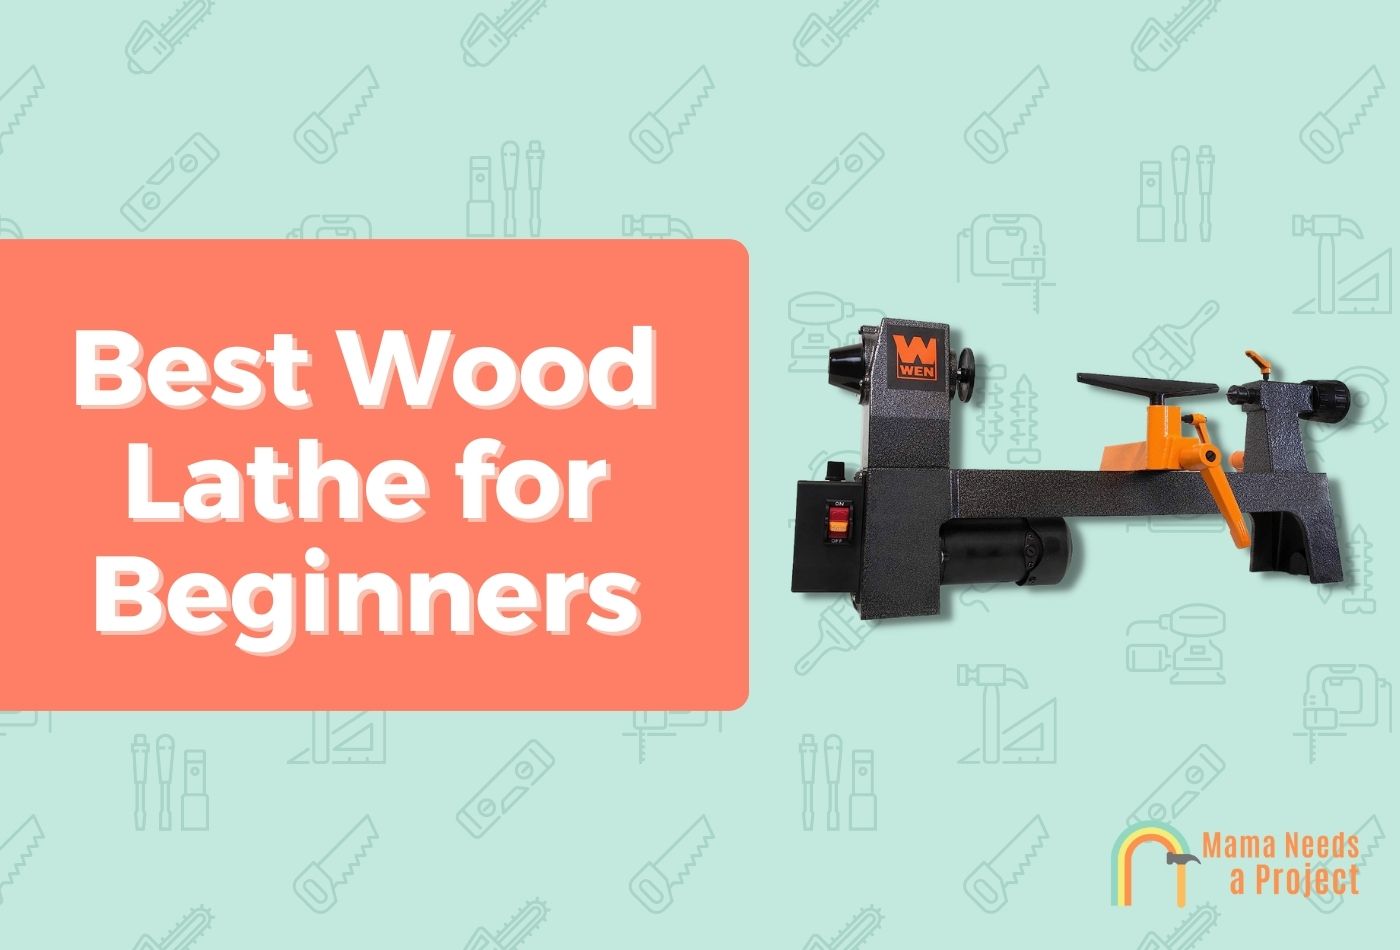 Best Wood Lathe for Beginners